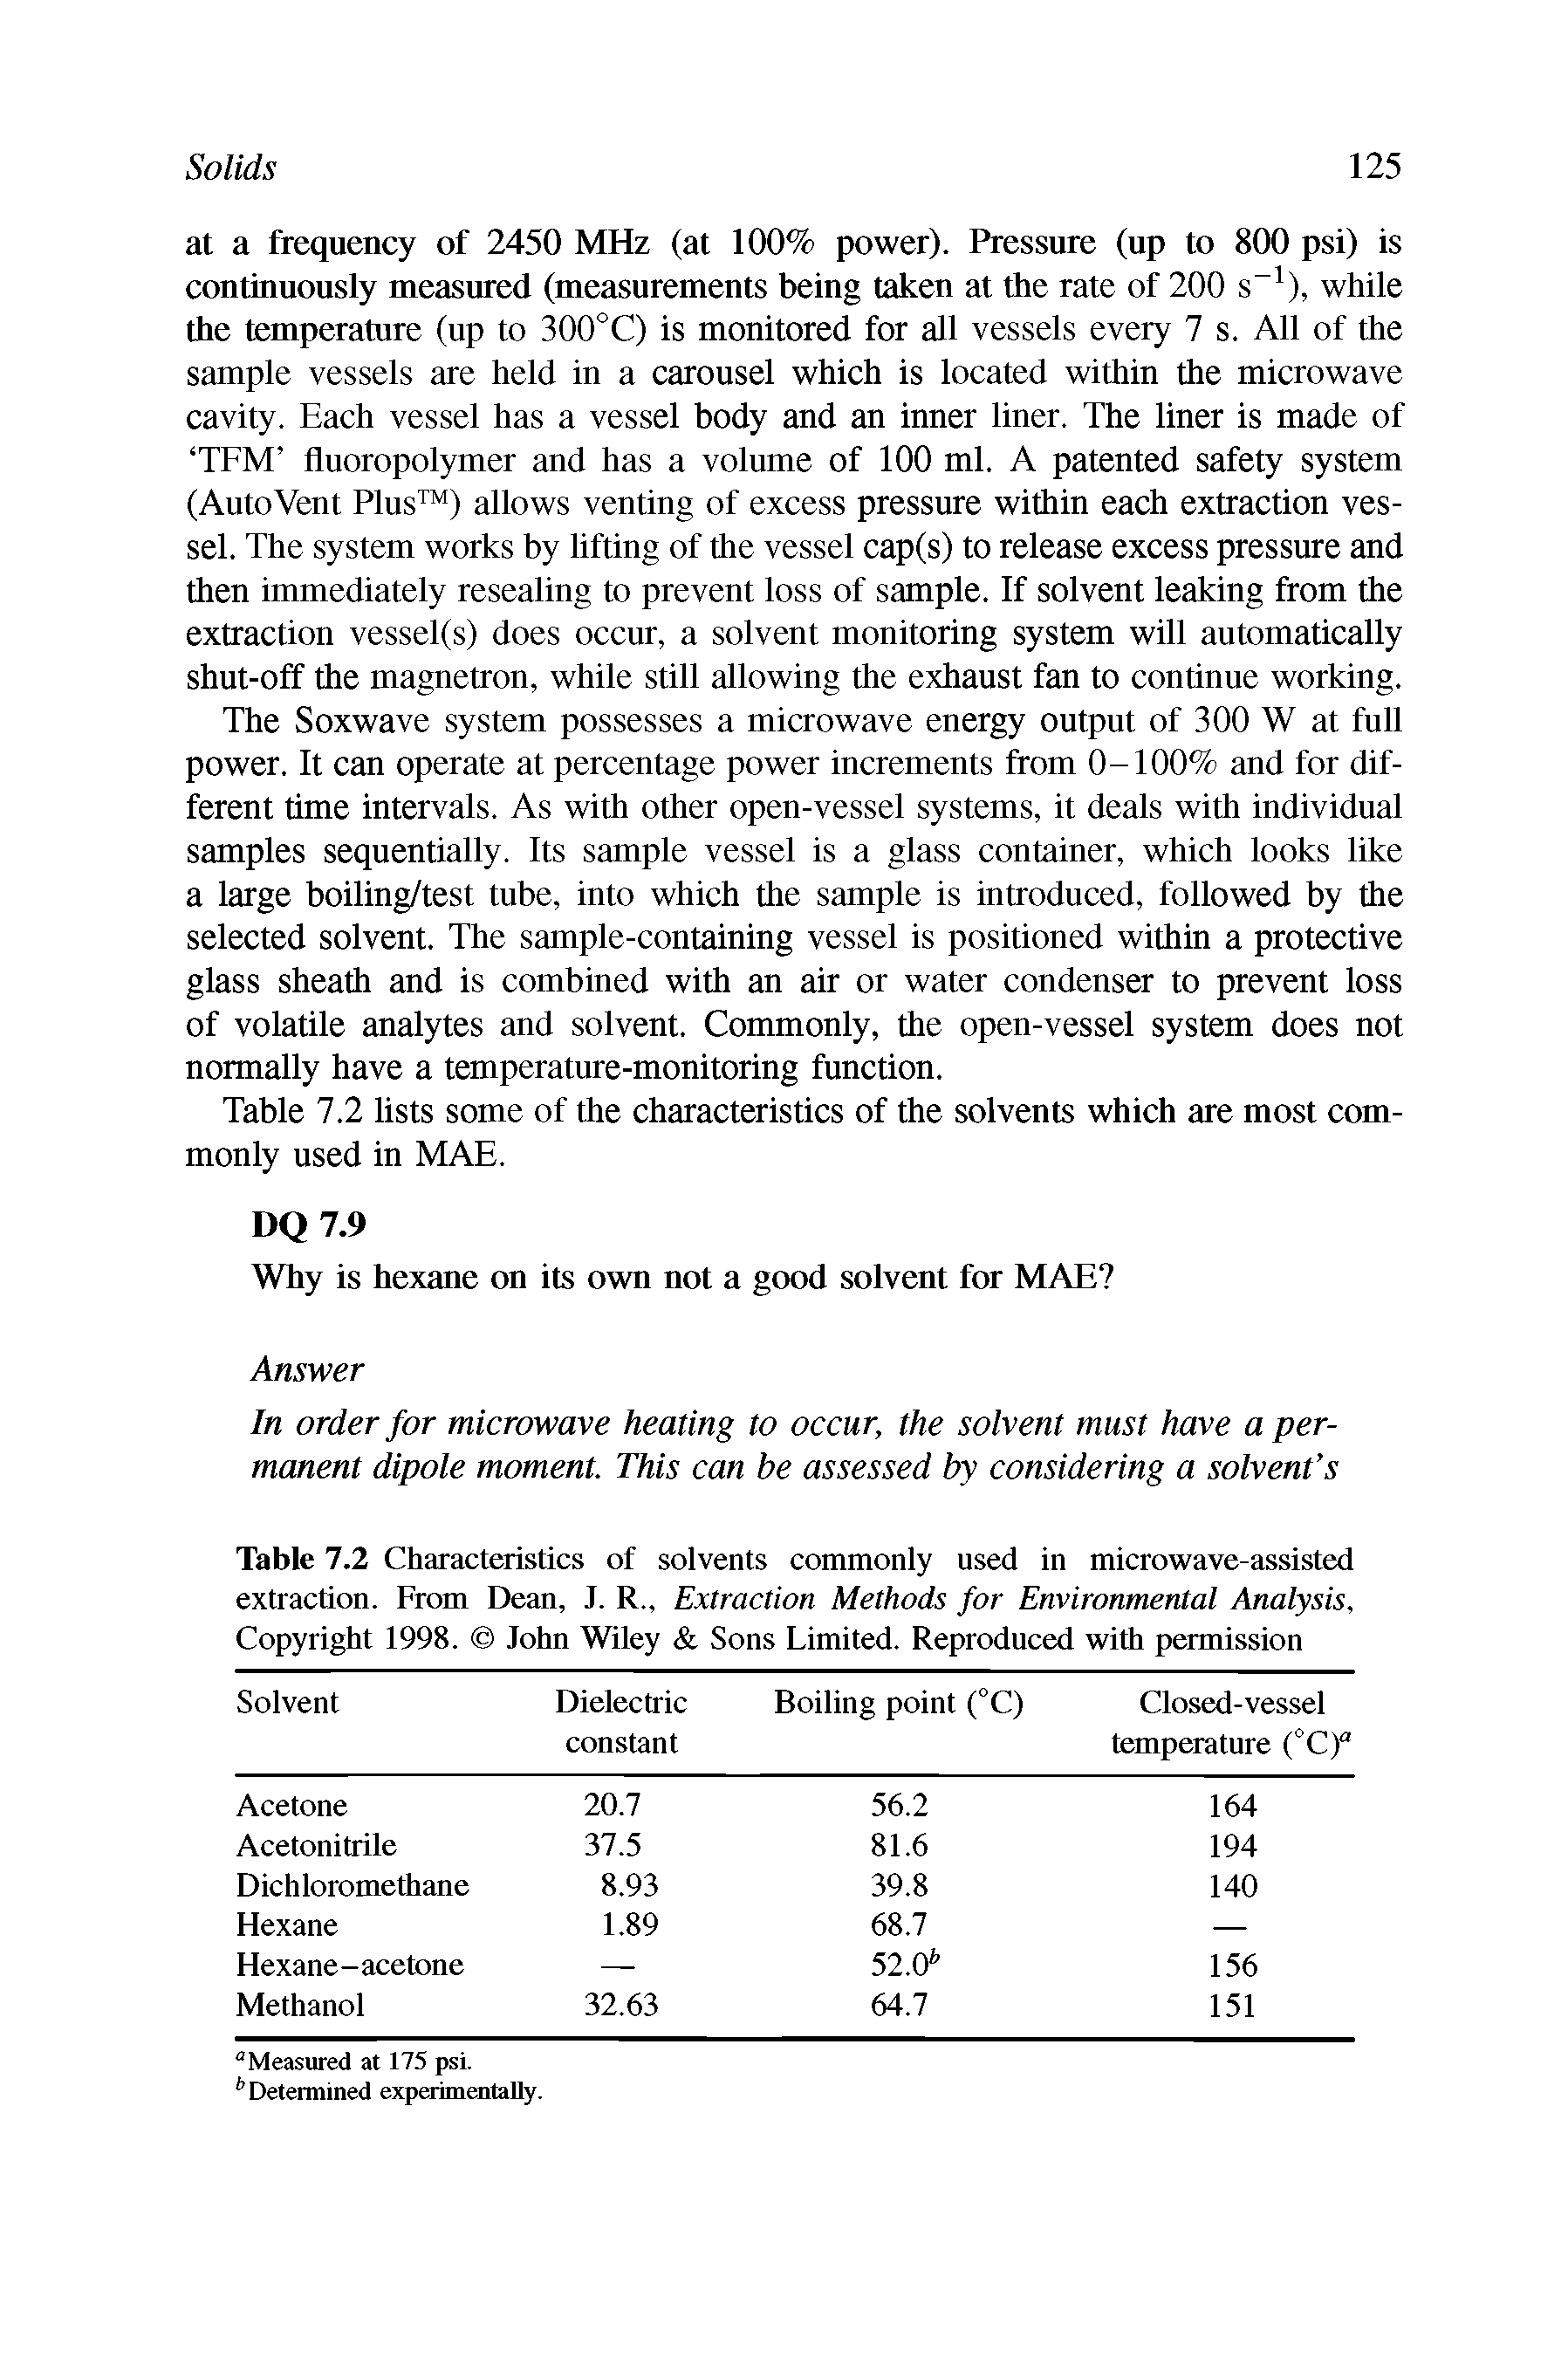 Table 7.2 Characteristics of solvents commonly used in microwave-assisted extraction. From Dean, J. R., Extraction Methods for Environmental Analysis, Copyright 1998. John Wiley Sons Limited. Reproduced with permission...